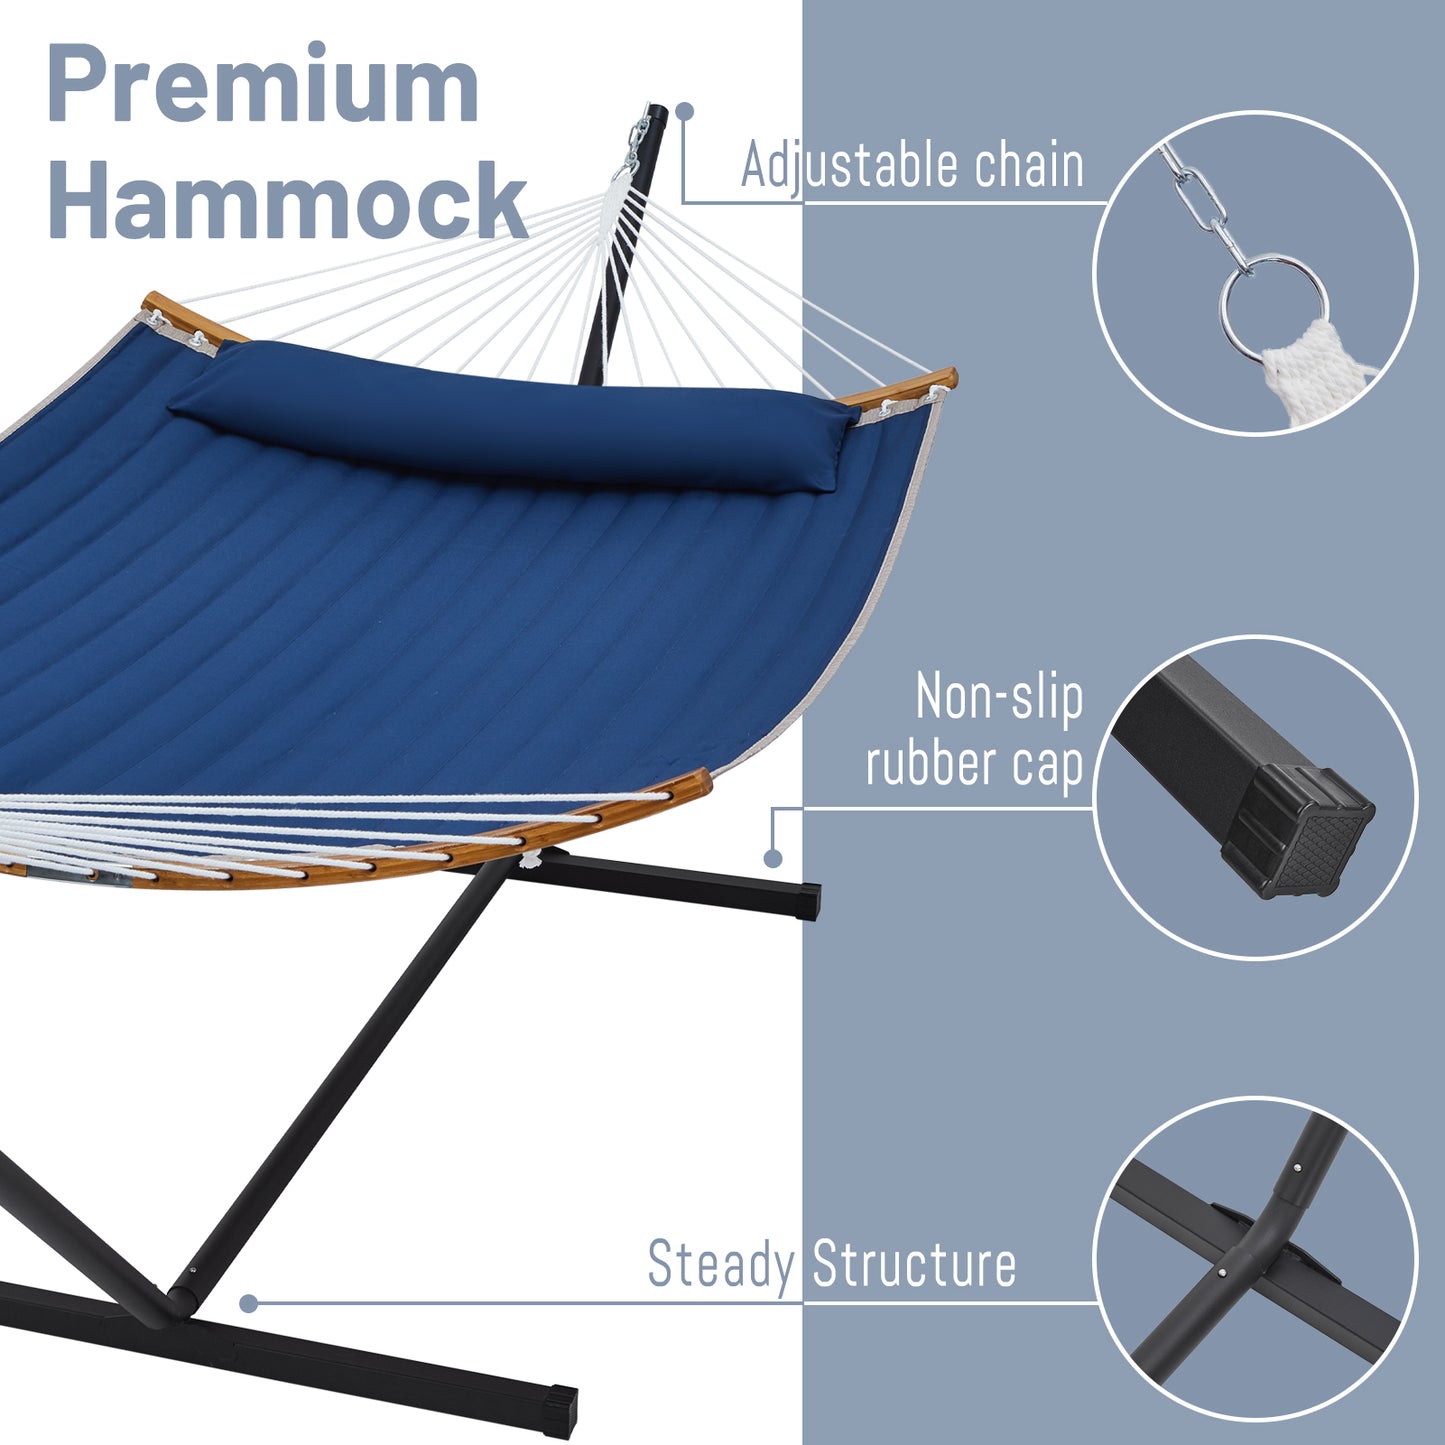 SUPERJARE Curved-Bar Hammock with Stand, 2 Person Heavy Duty Hammock Frame, Detachable Pillow & Portable Carrying Bag, Perfect for Outdoor & Indoor, Navy Blue